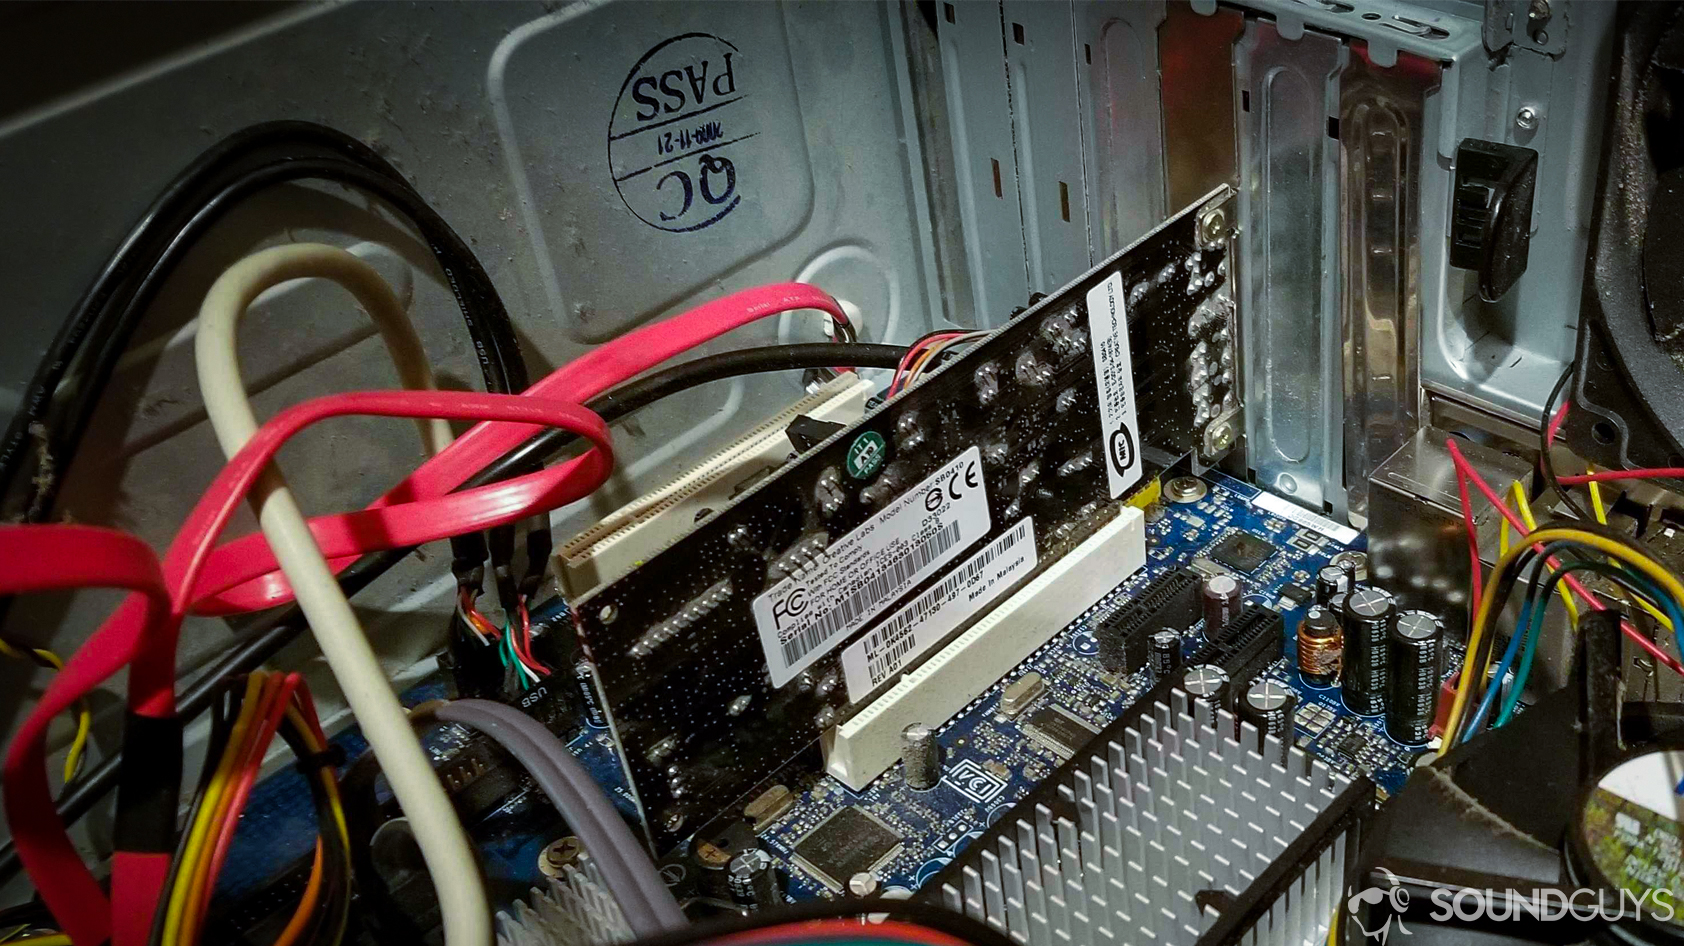 A photo of a soundcard installed in a PCI slot inside a dusty computer tower.